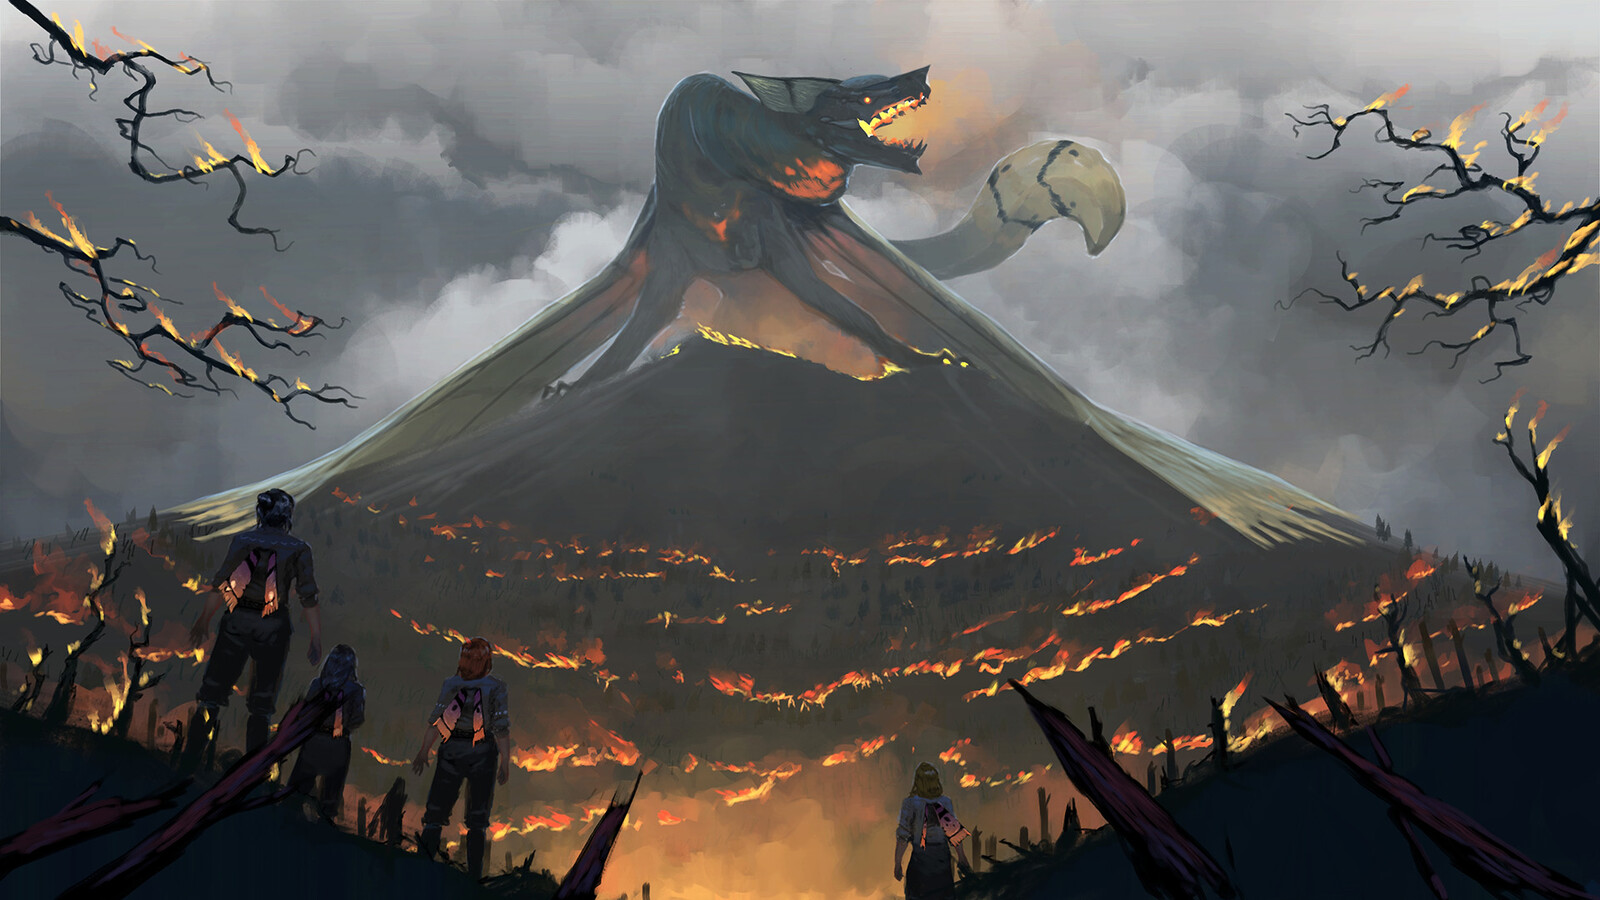 Keyframe 4: The dragon's wrath has grown into an uncontrollable beast, destroying its own people.
